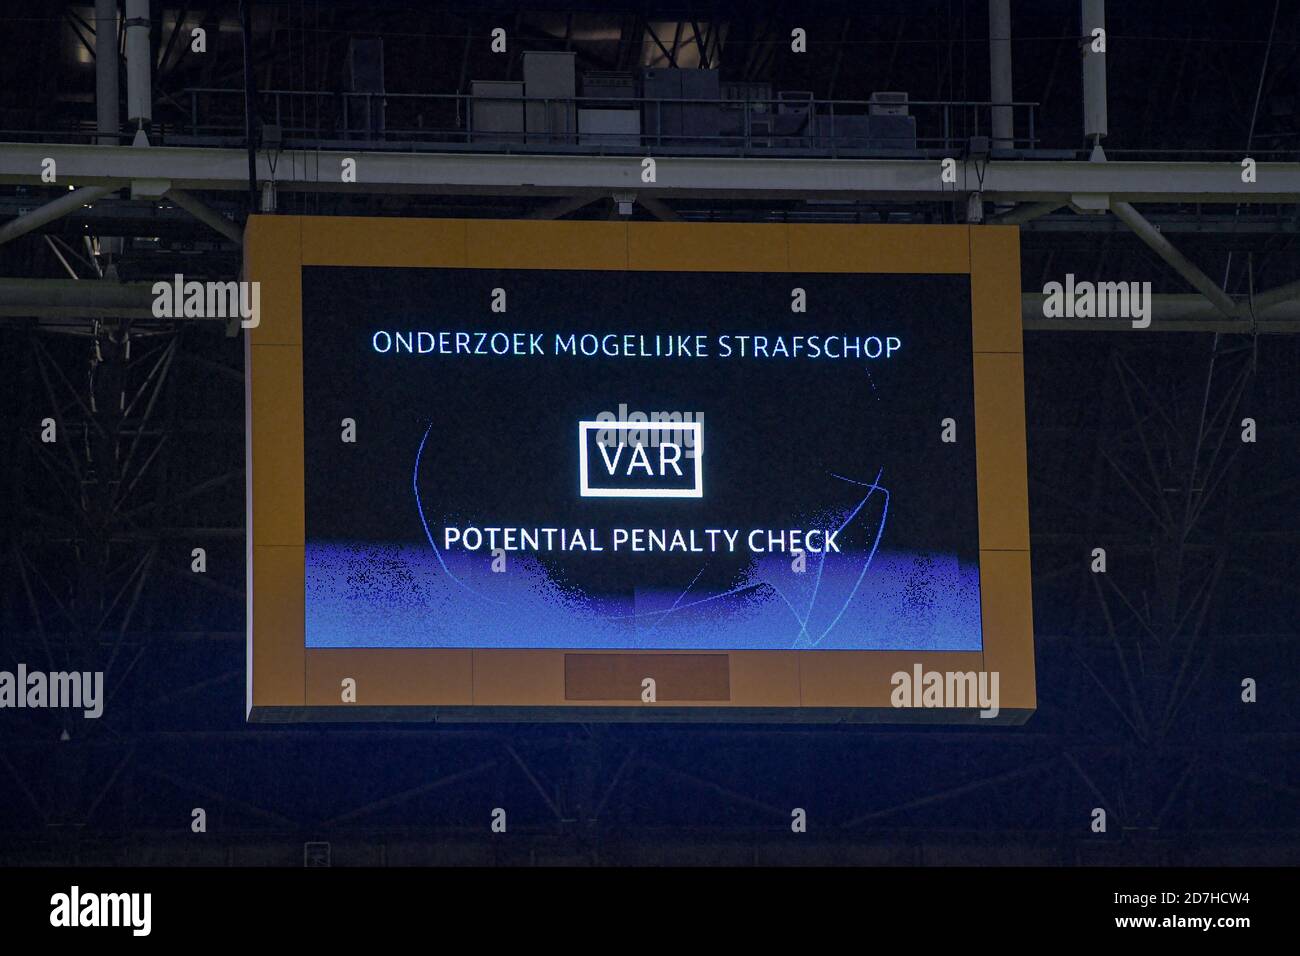 AMSTERDAM, NETHERLANDS - OCTOBER 21: Information board / sign VAR Potential Penalty Check, Onderzoek mogelijk strafschop, Video Asisstant Referee during the UEFA Champions League match between and at the Johan